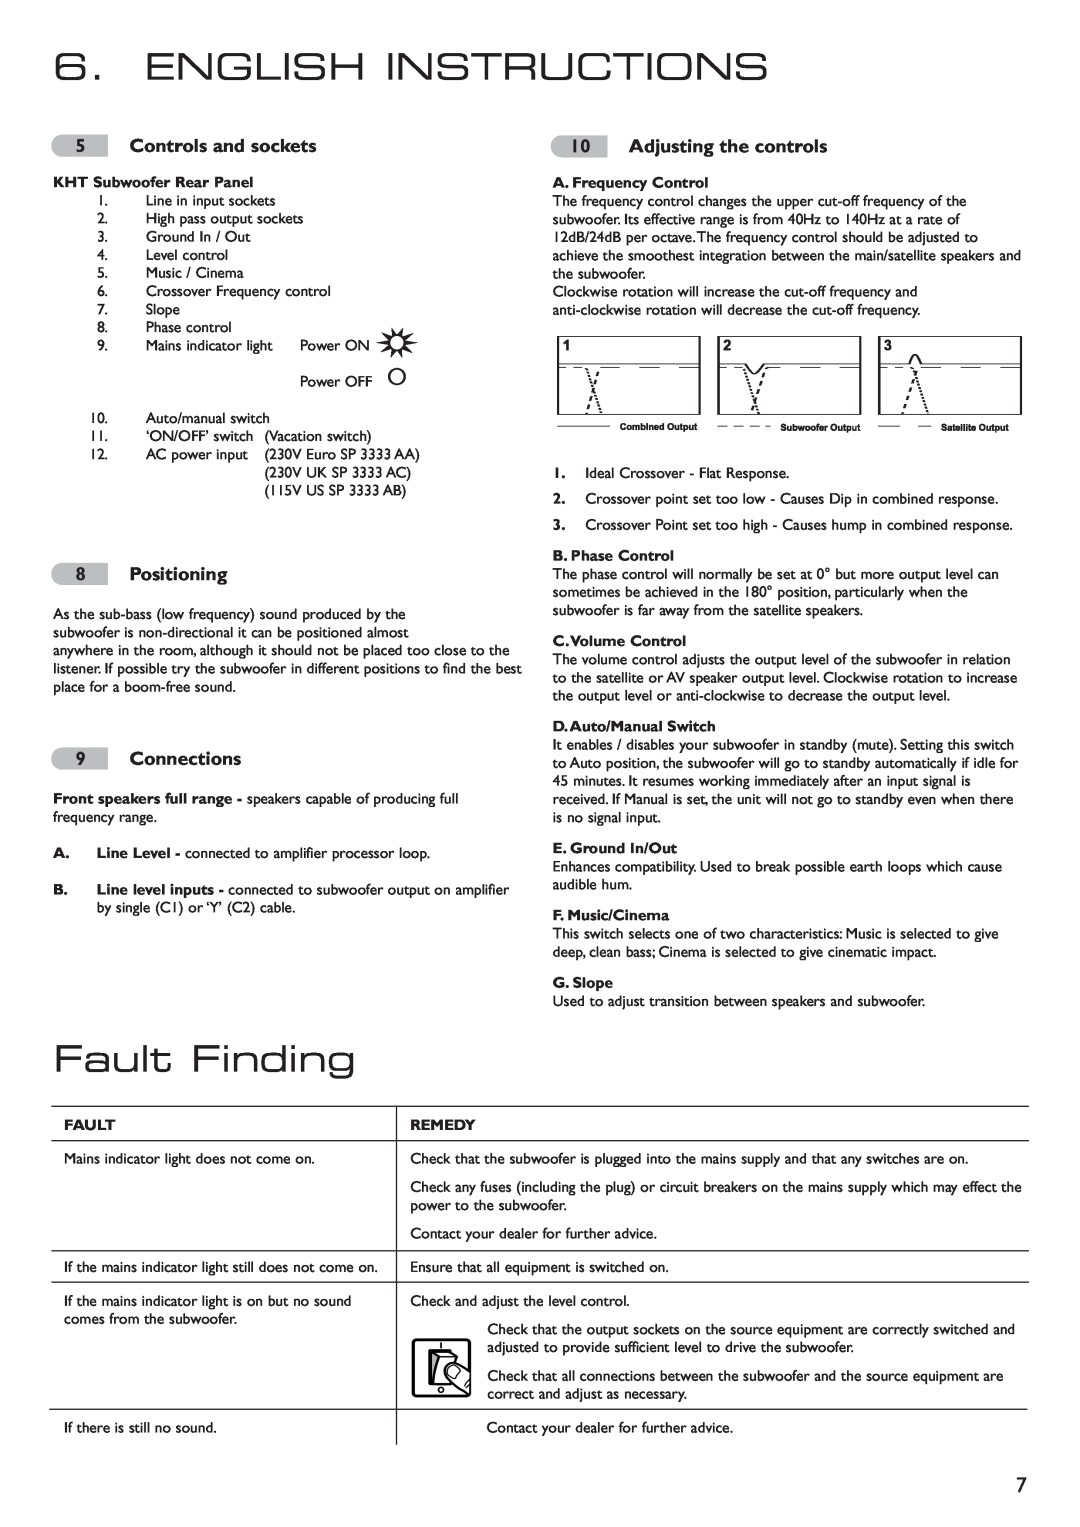 KEF Audio 290149ML installation manual English Instructions, Fault Finding, Controls and sockets, Positioning, Connections 